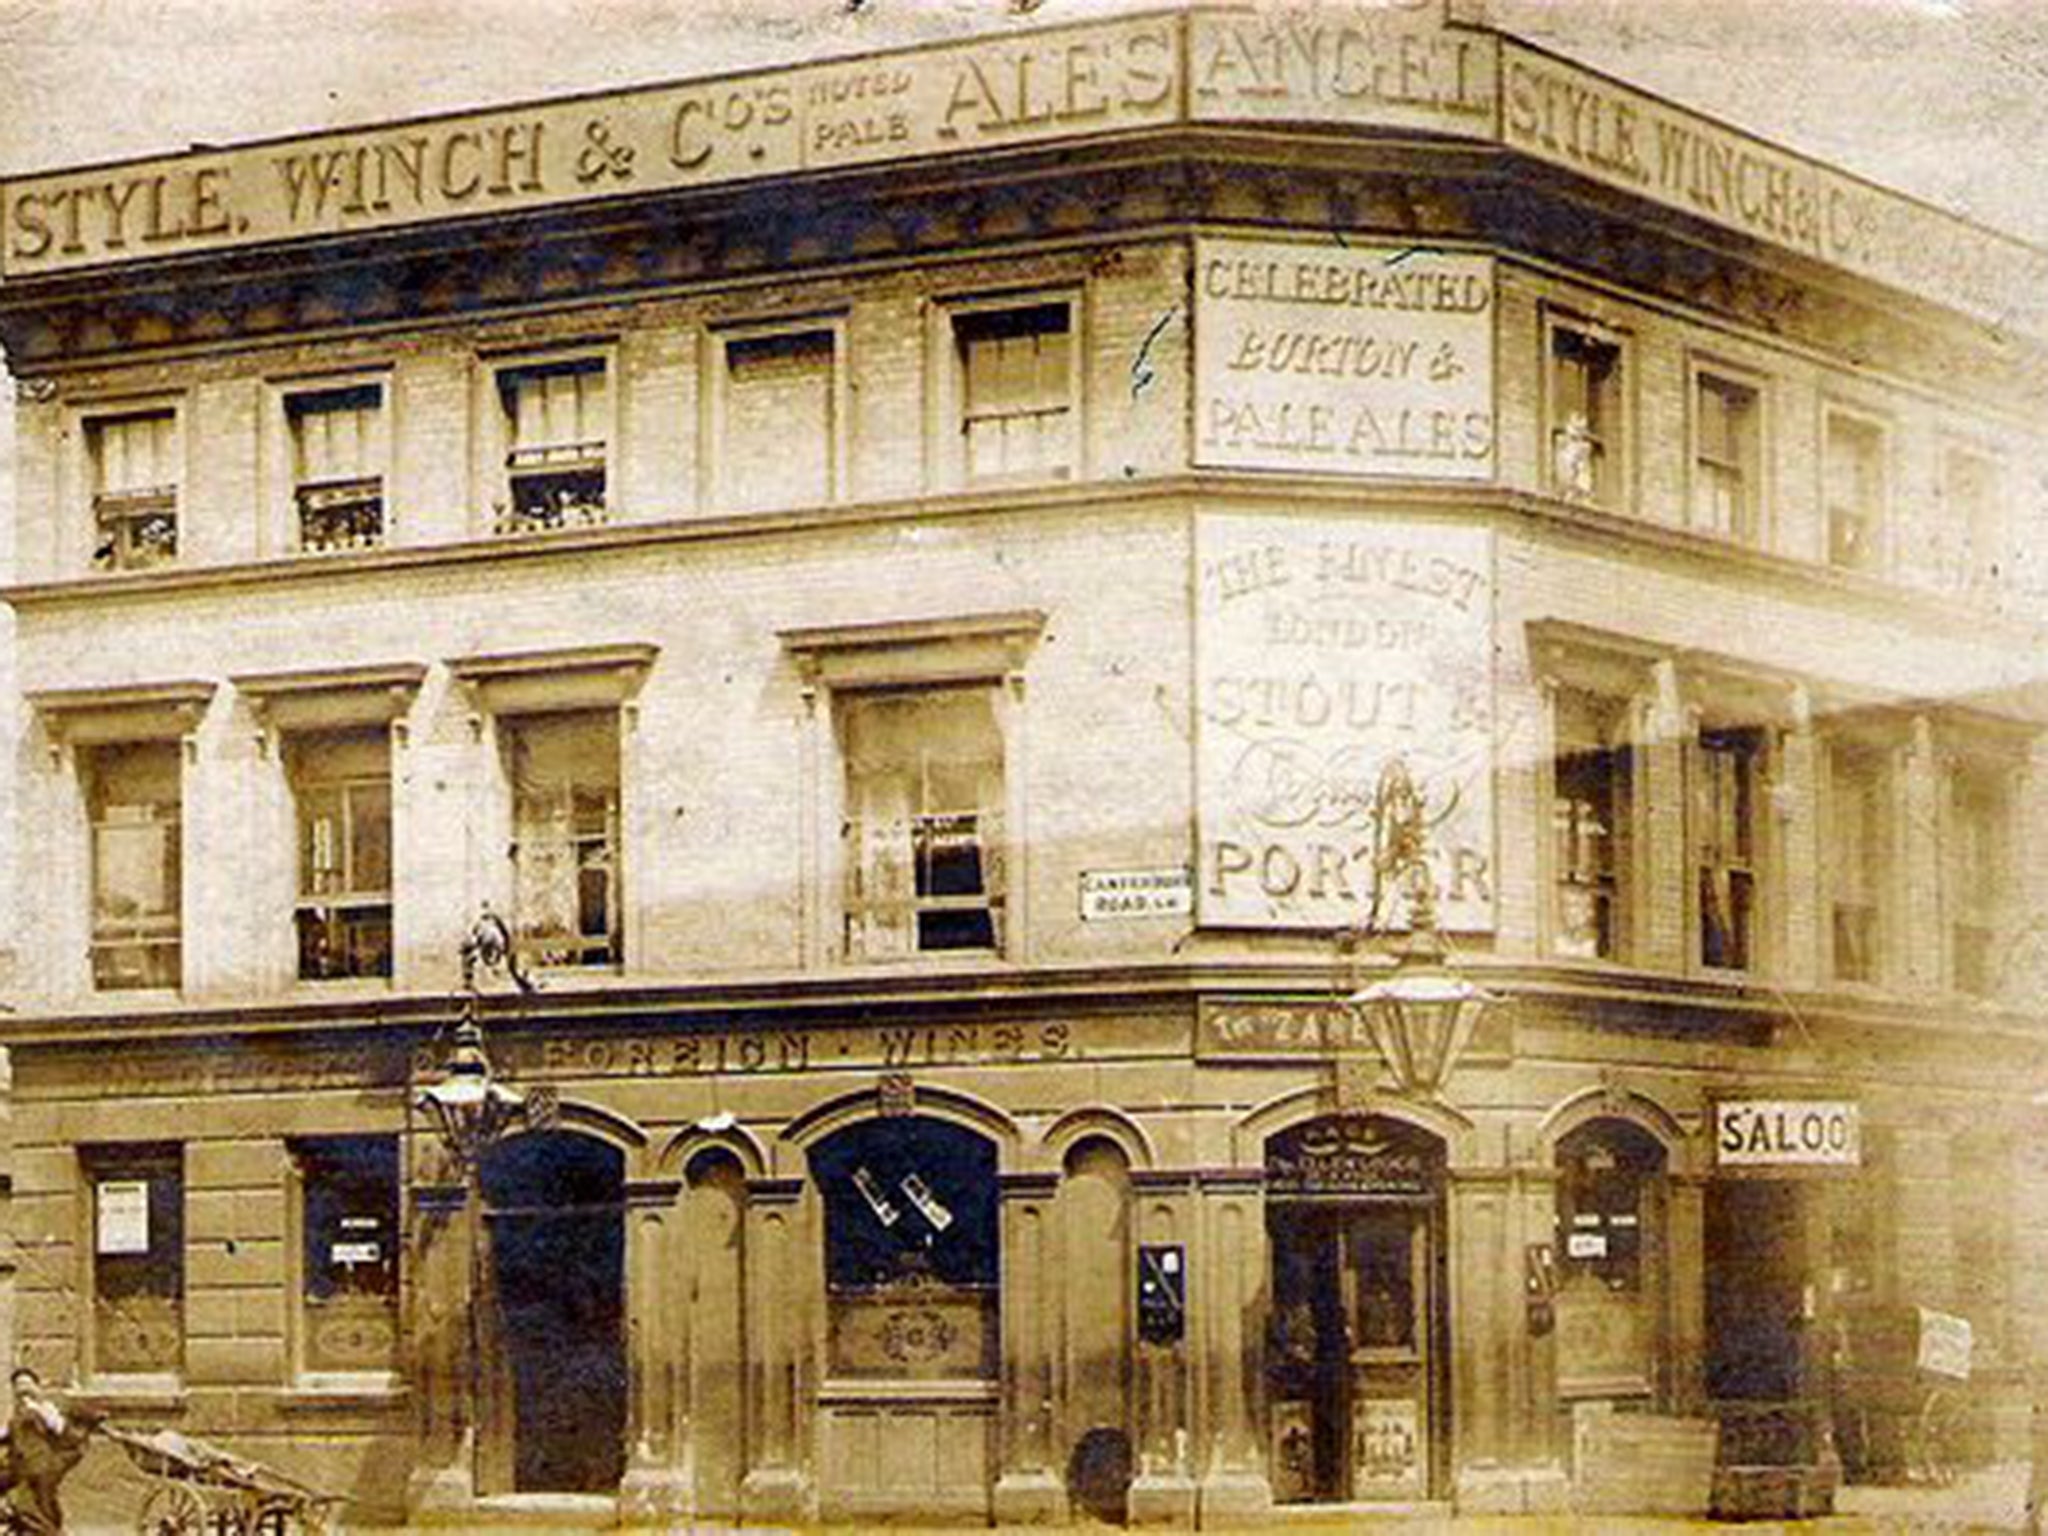 The Angel pub symbolises the transformation of Brixton. It started life as a grand saloon bar and hotel, but today has been replaced by expensive apartments